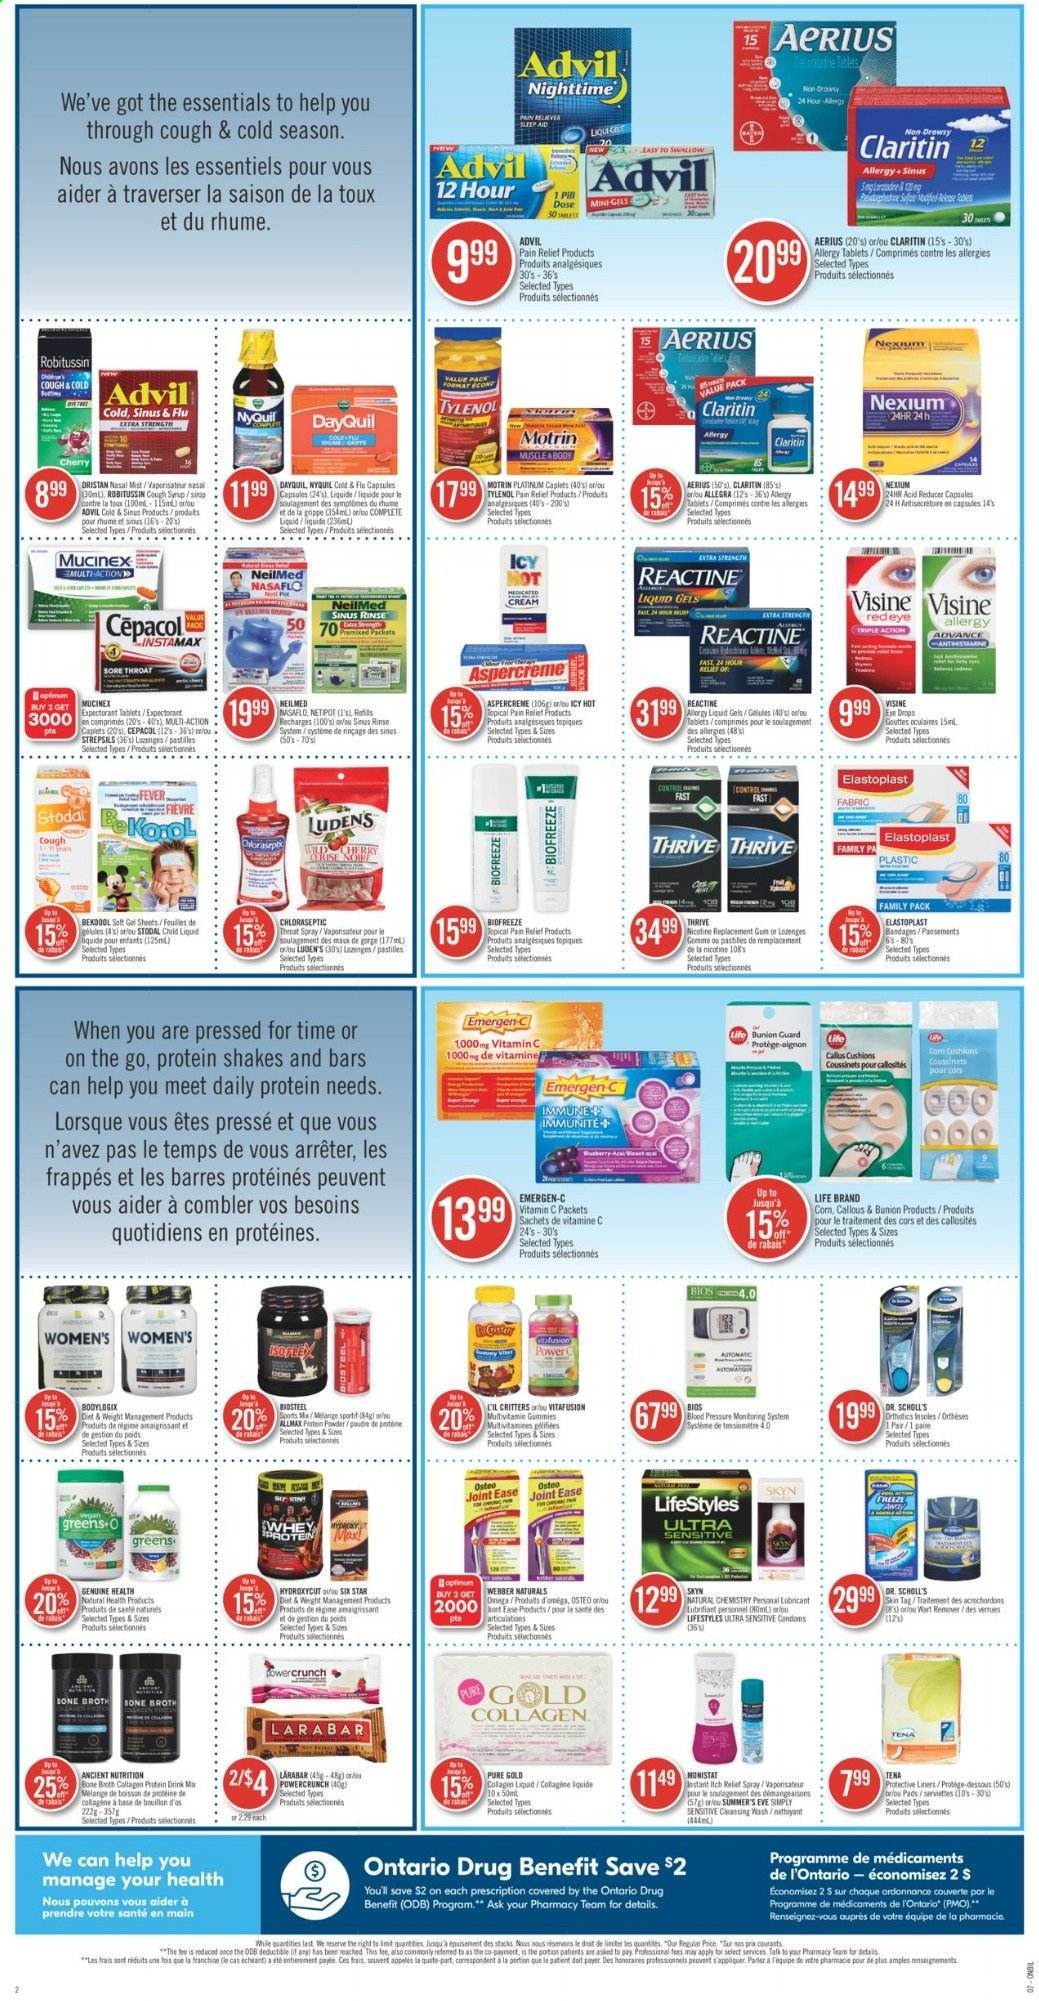 thumbnail - Shoppers Drug Mart Flyer - January 09, 2021 - January 15, 2021 - Sales products - pastilles, broth, syrup, lubricant, pain relief, DayQuil, Cold & Flu, Mucinex, multivitamin, Tylenol, Vitafusion, vitamin c, NyQuil, Aspercreme, Nexium, eye drops, Advil Rapid, Emergen-C, Motrin, Dr. Scholl's, Robitussin. Page 2.